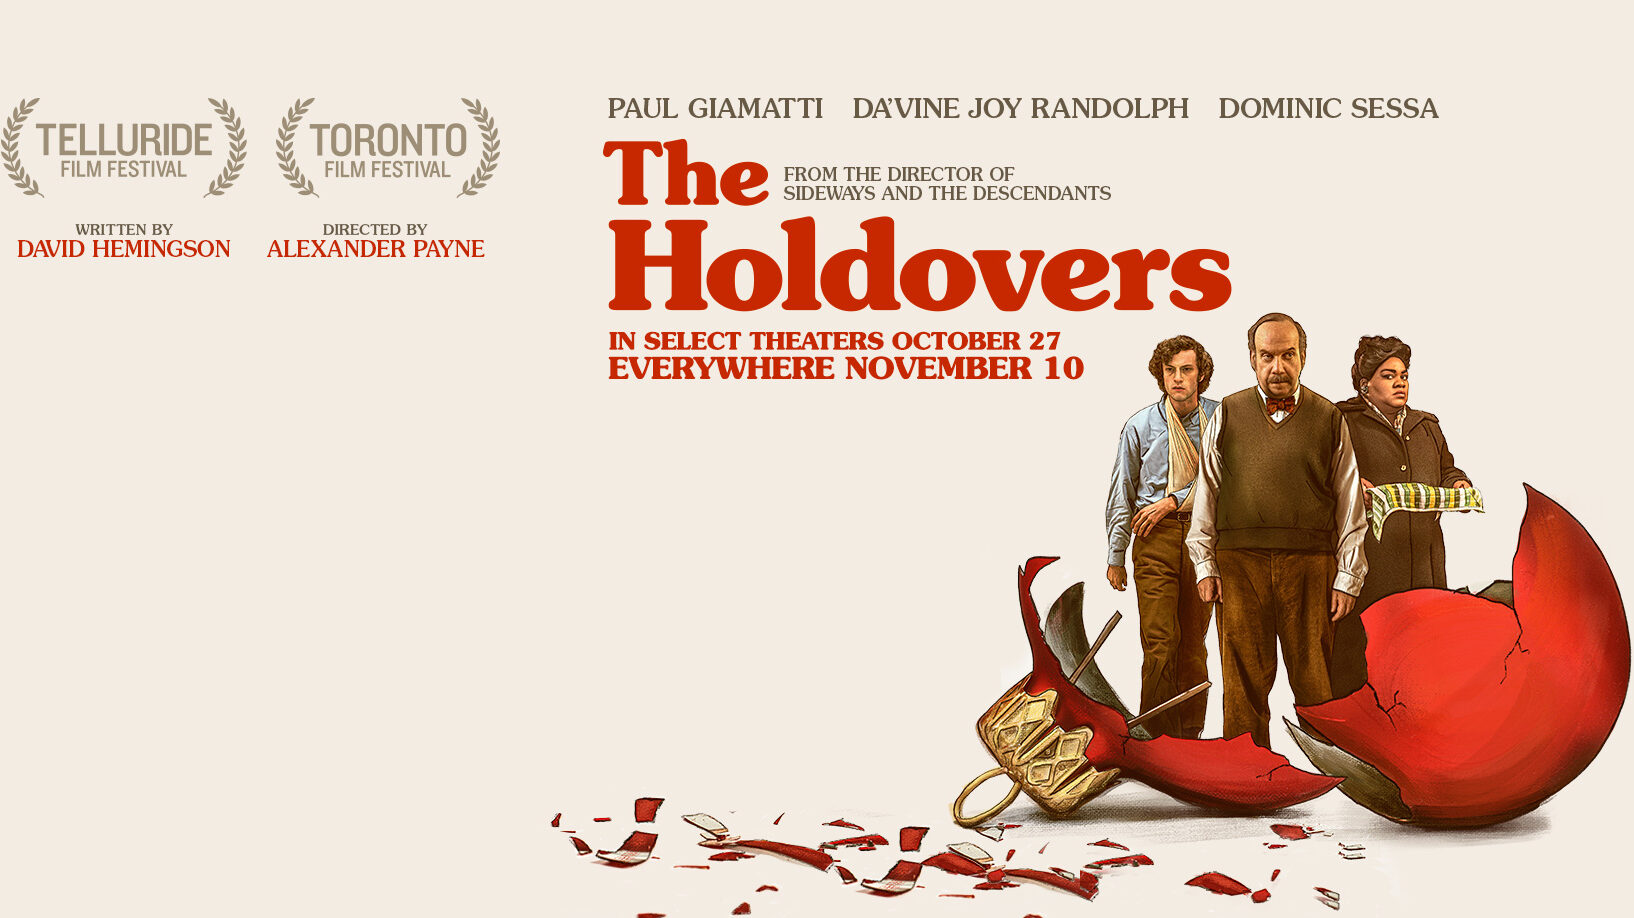 THE HOLDOVERS